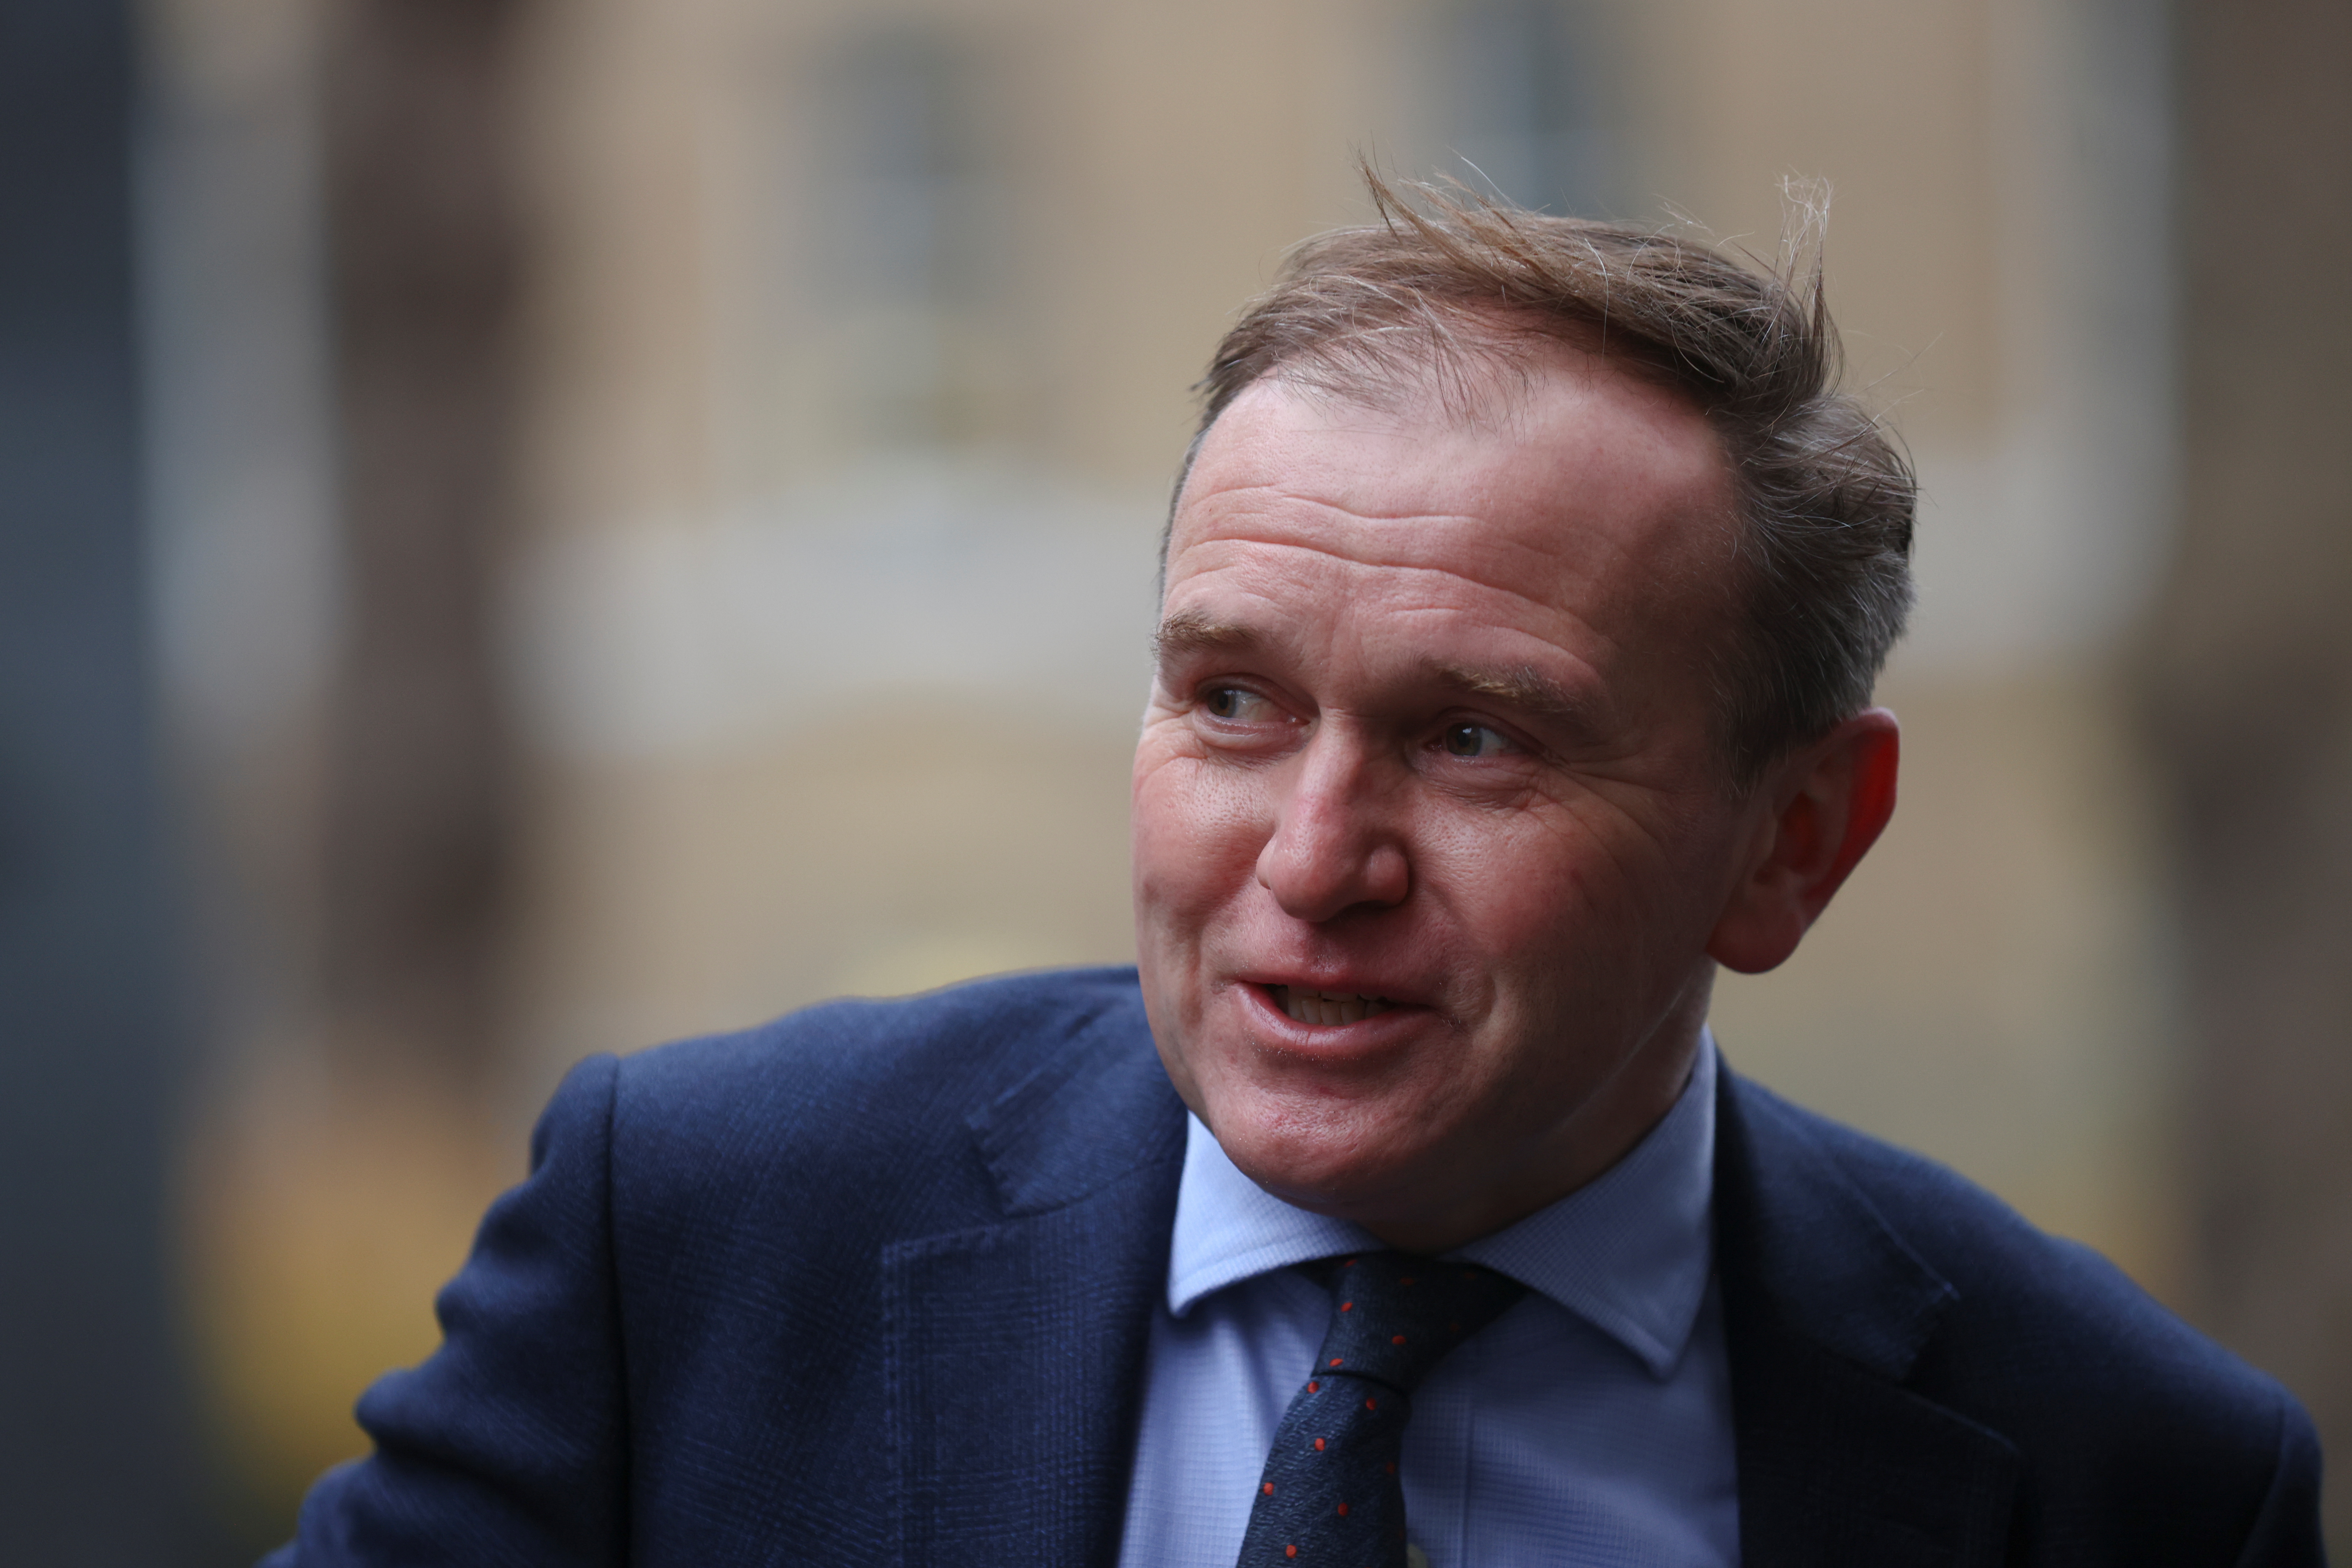 Britain's Environment, Food and Rural Affairs Secretary George Eustice arrives at Downing Street in London